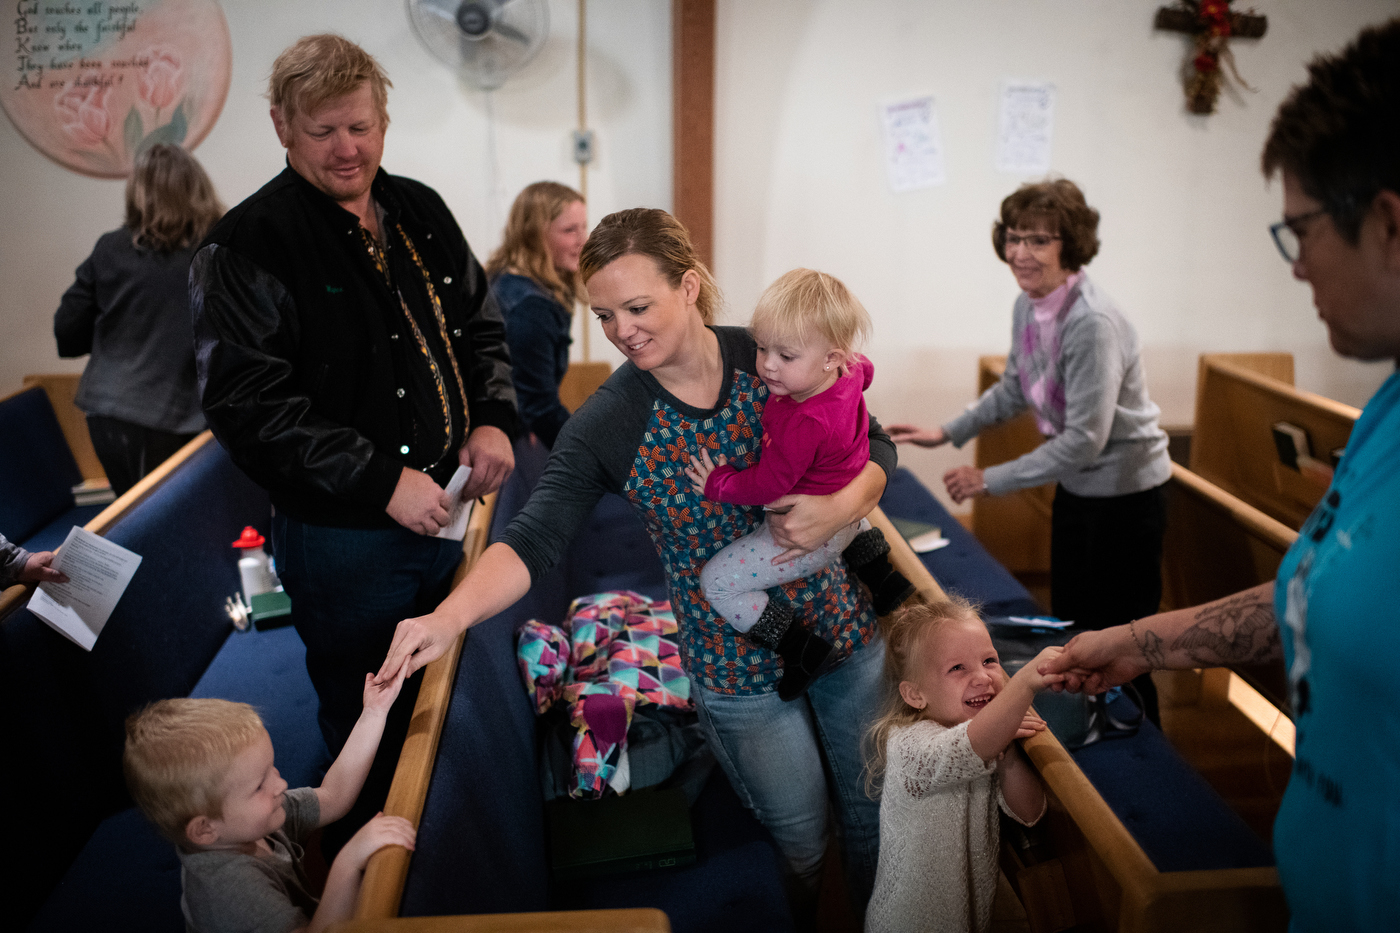  People share the peace during worship at American Lutheran Church, an ELCA church, in Bison, SD. 